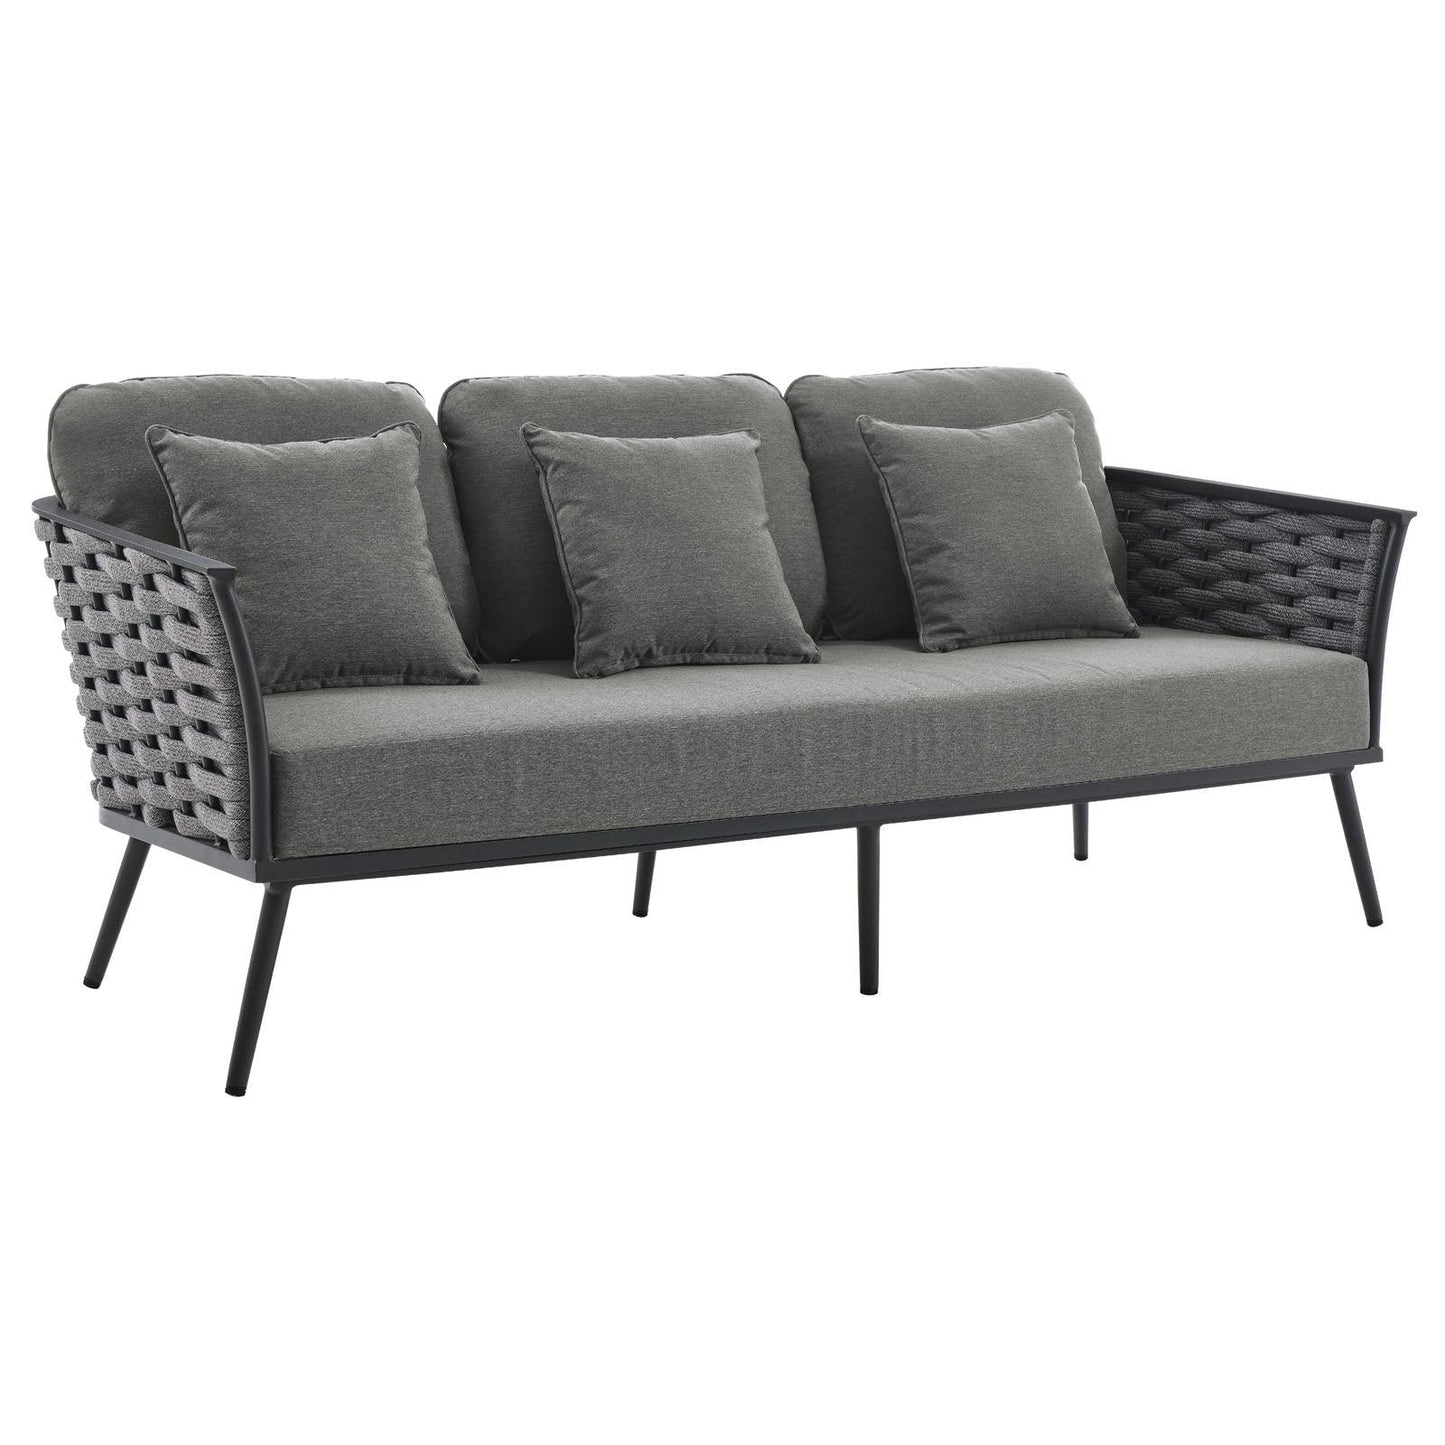 Modway Stance 4 Piece Outdoor Patio Aluminum Sectional Sofa Set FredCo